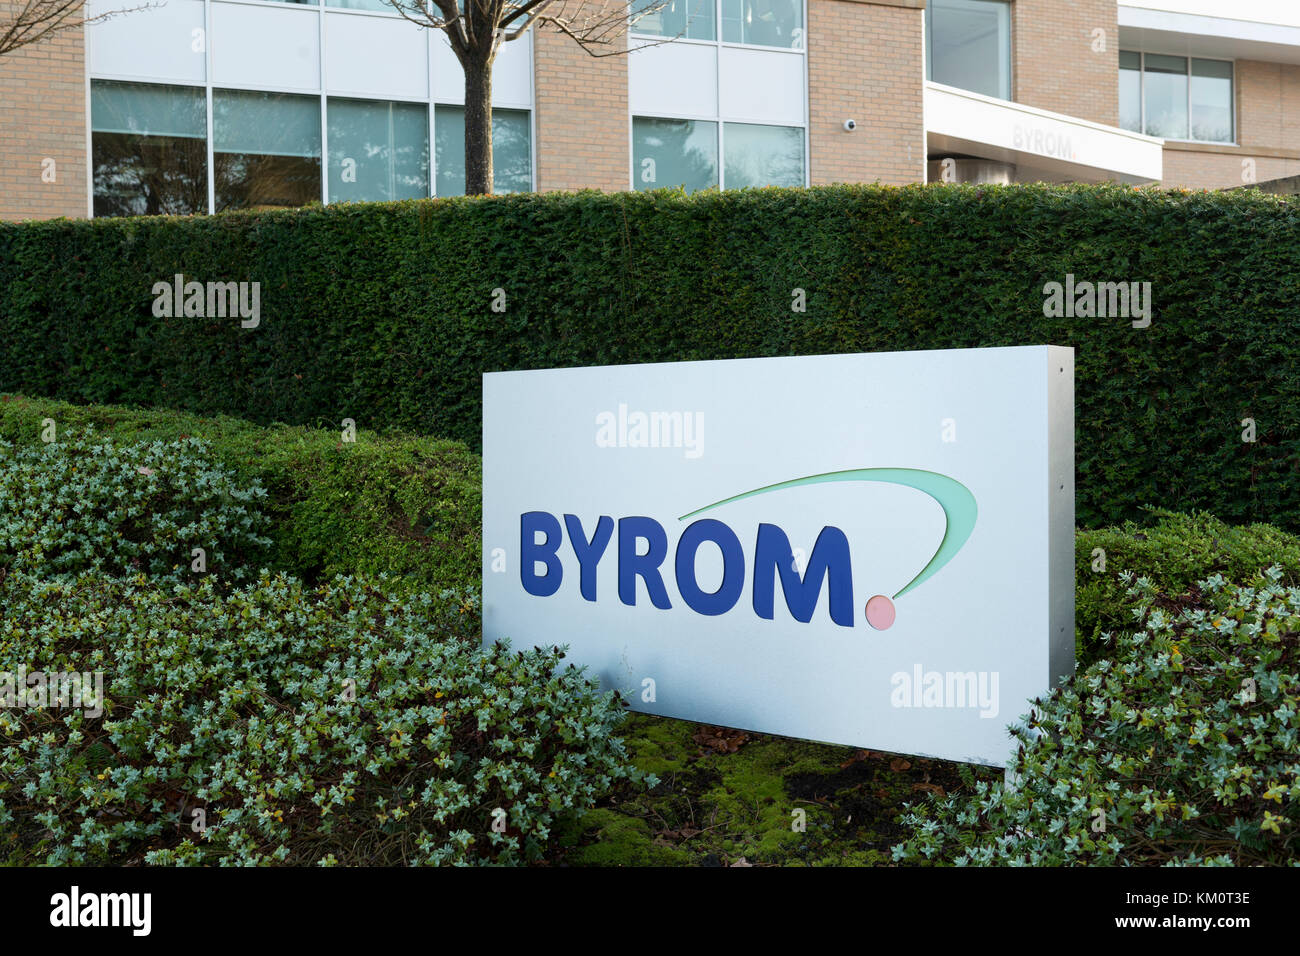 Byrom Plc is home of MATCH Ticketing, FIFA's ticketing service provider. This Byrom office is located in Cheadle, Cheshire, Greater Manchester, UK. Stock Photo